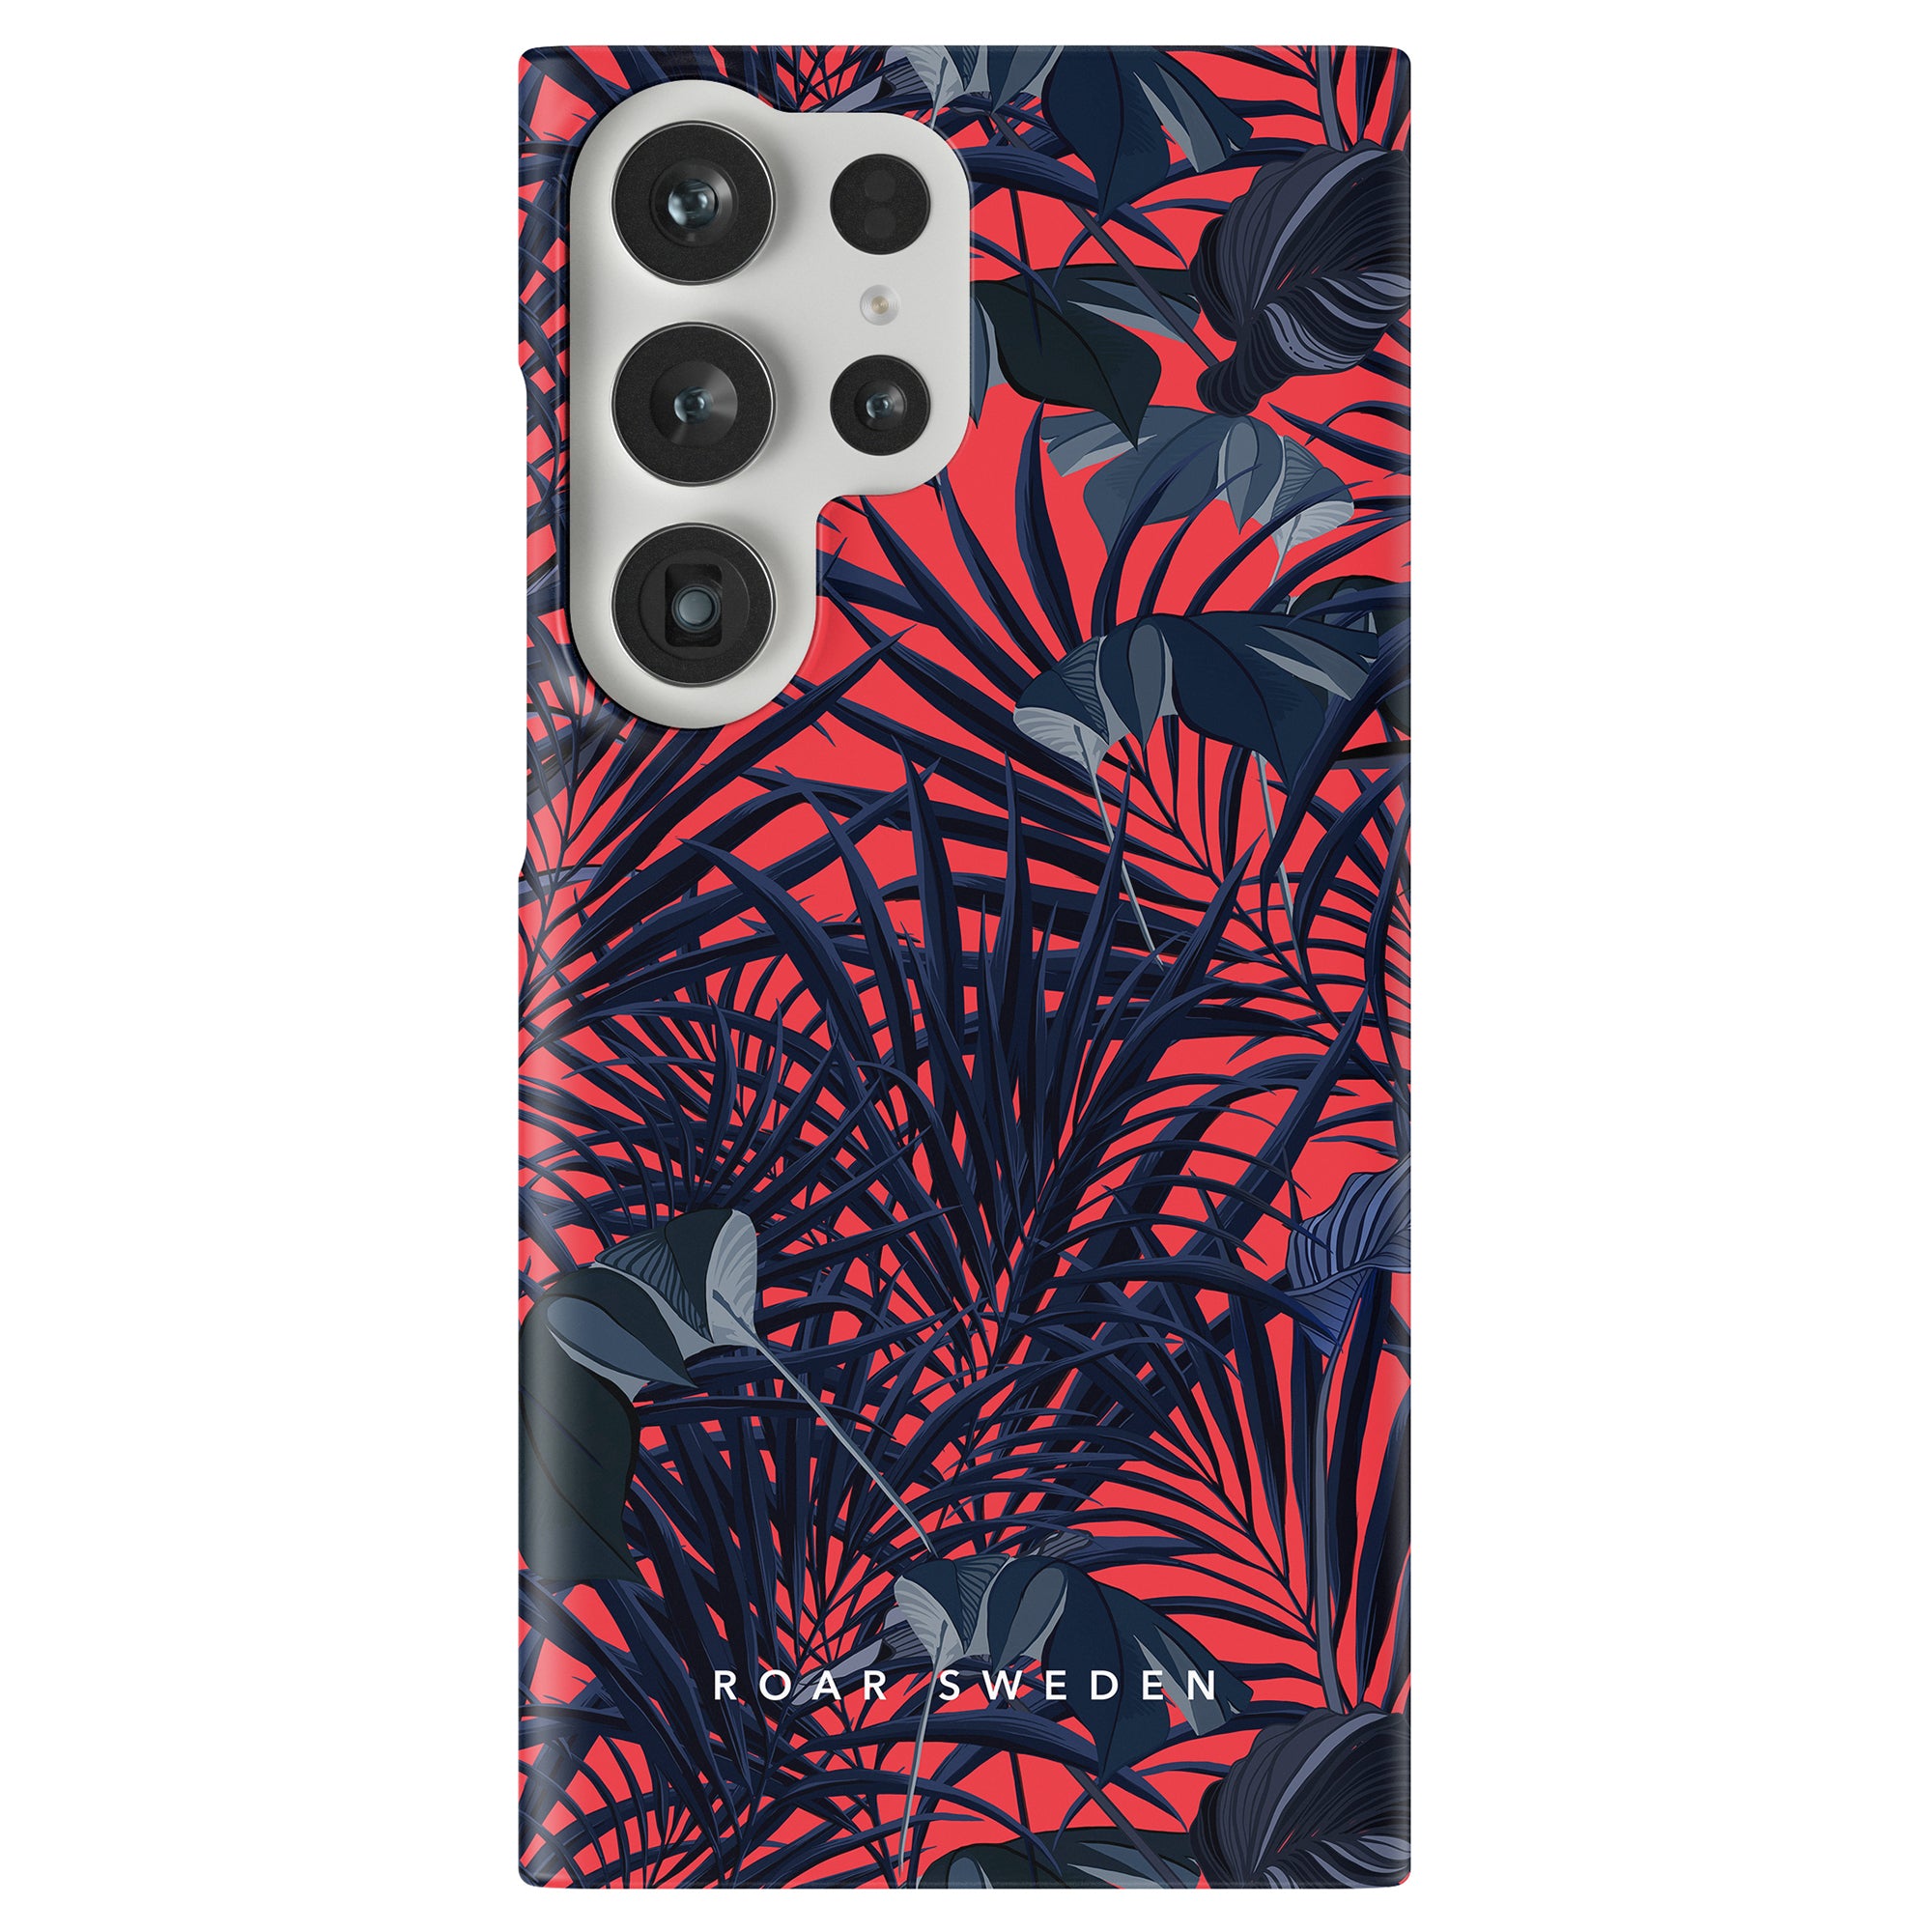 Introducing the Red Tropics - Slim case from our Jungle Collection, featuring a vivid red and black tropical leaf pattern and "ROAR SWEDEN" printed on the bottom. Perfectly embodying the Red Tropics, this case offers both style and protection for your smartphone.